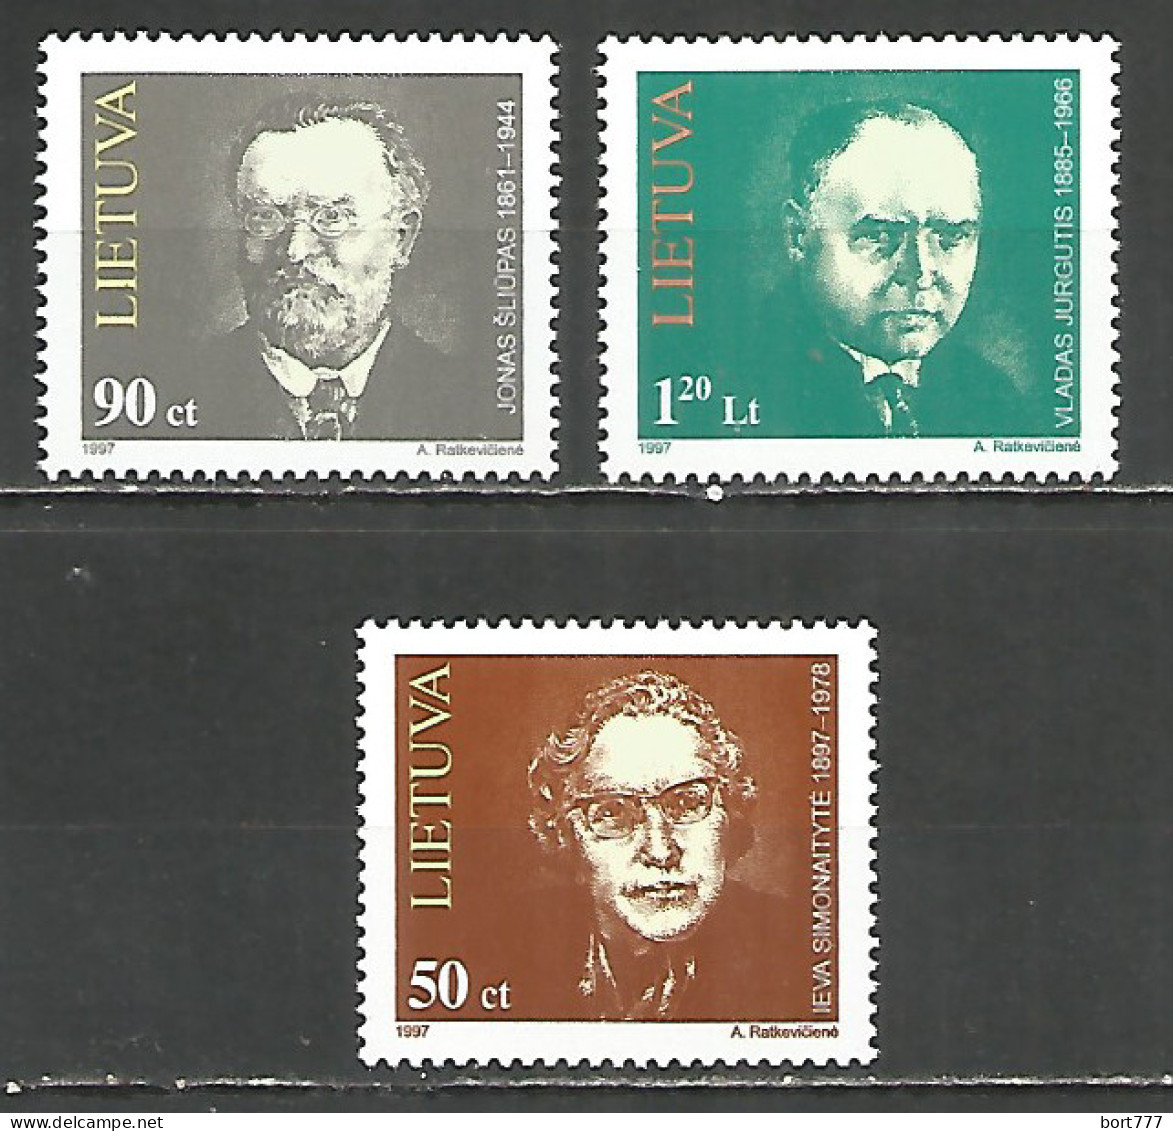 Lithuania 1997 Year Mint Stamps MNH (**)  - Litauen